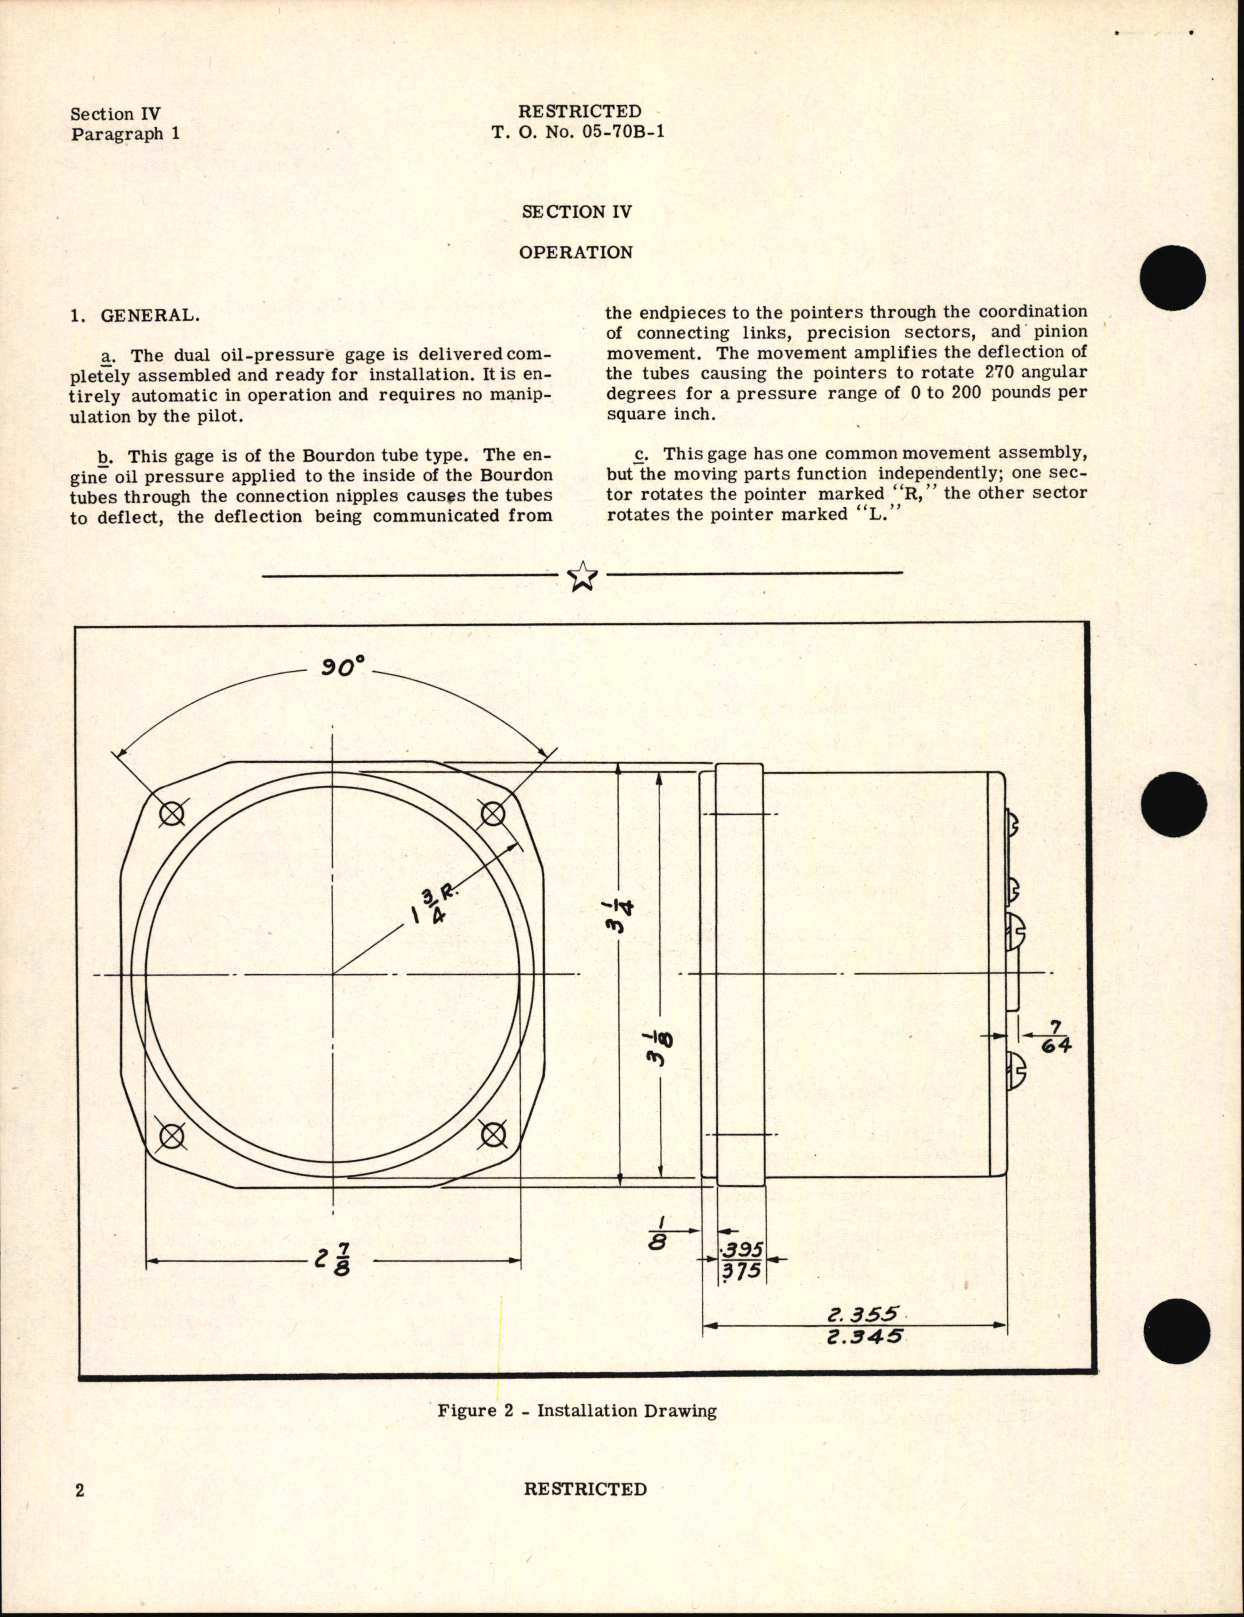 Sample page 6 from AirCorps Library document: Handbook of Instructions with Parts Catalog for Type AN 5772-2 Dual Oil Pressure Gage